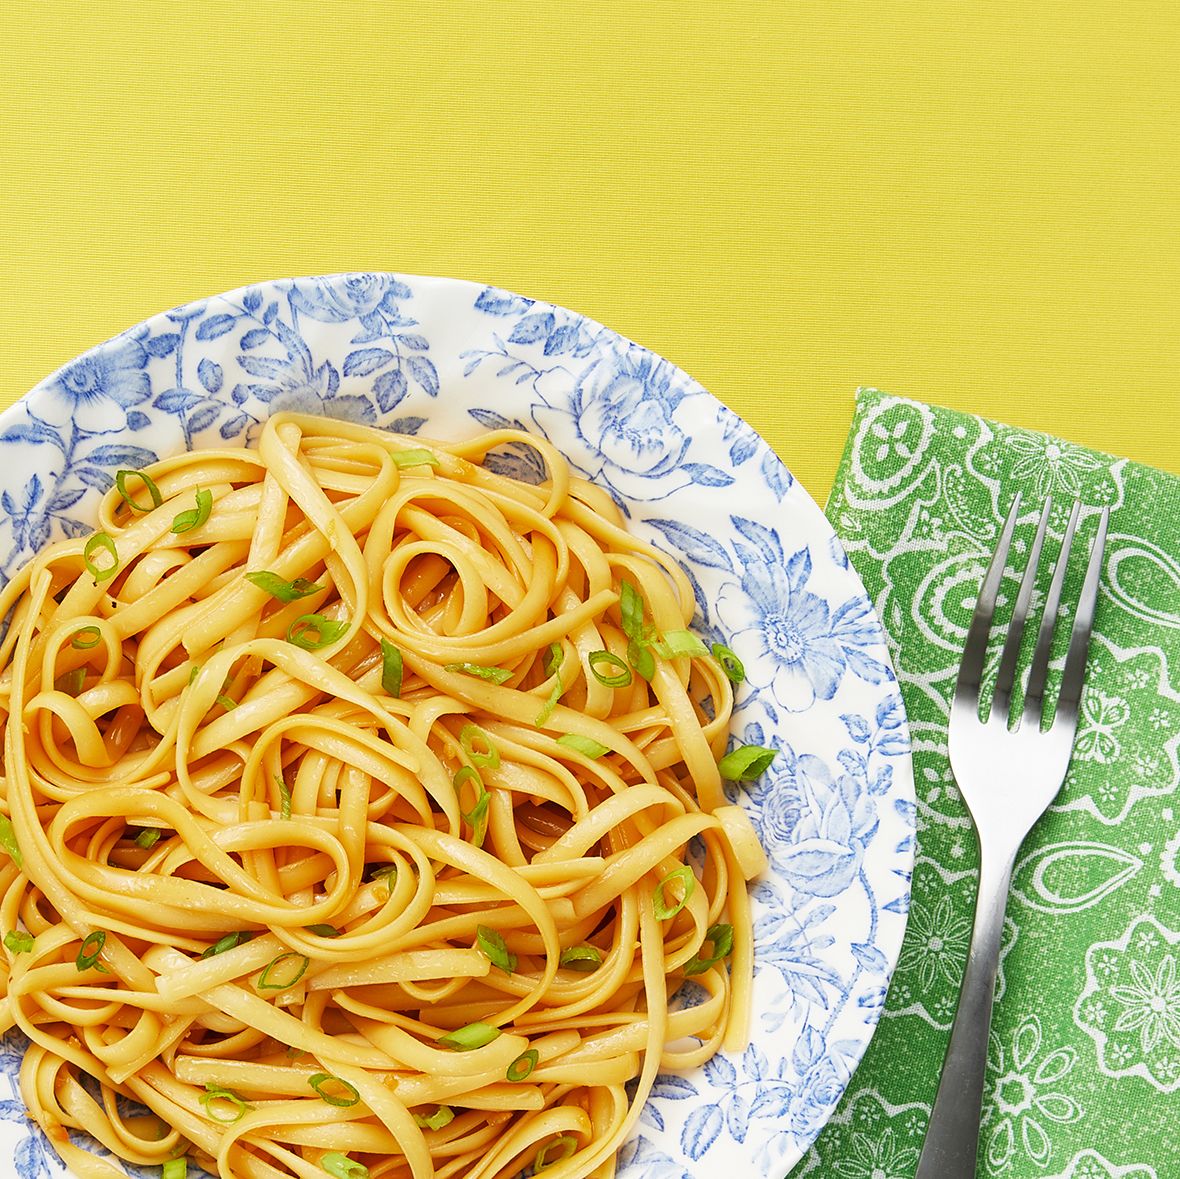 Garlic Sesame Noodles - The flavours of kitchen